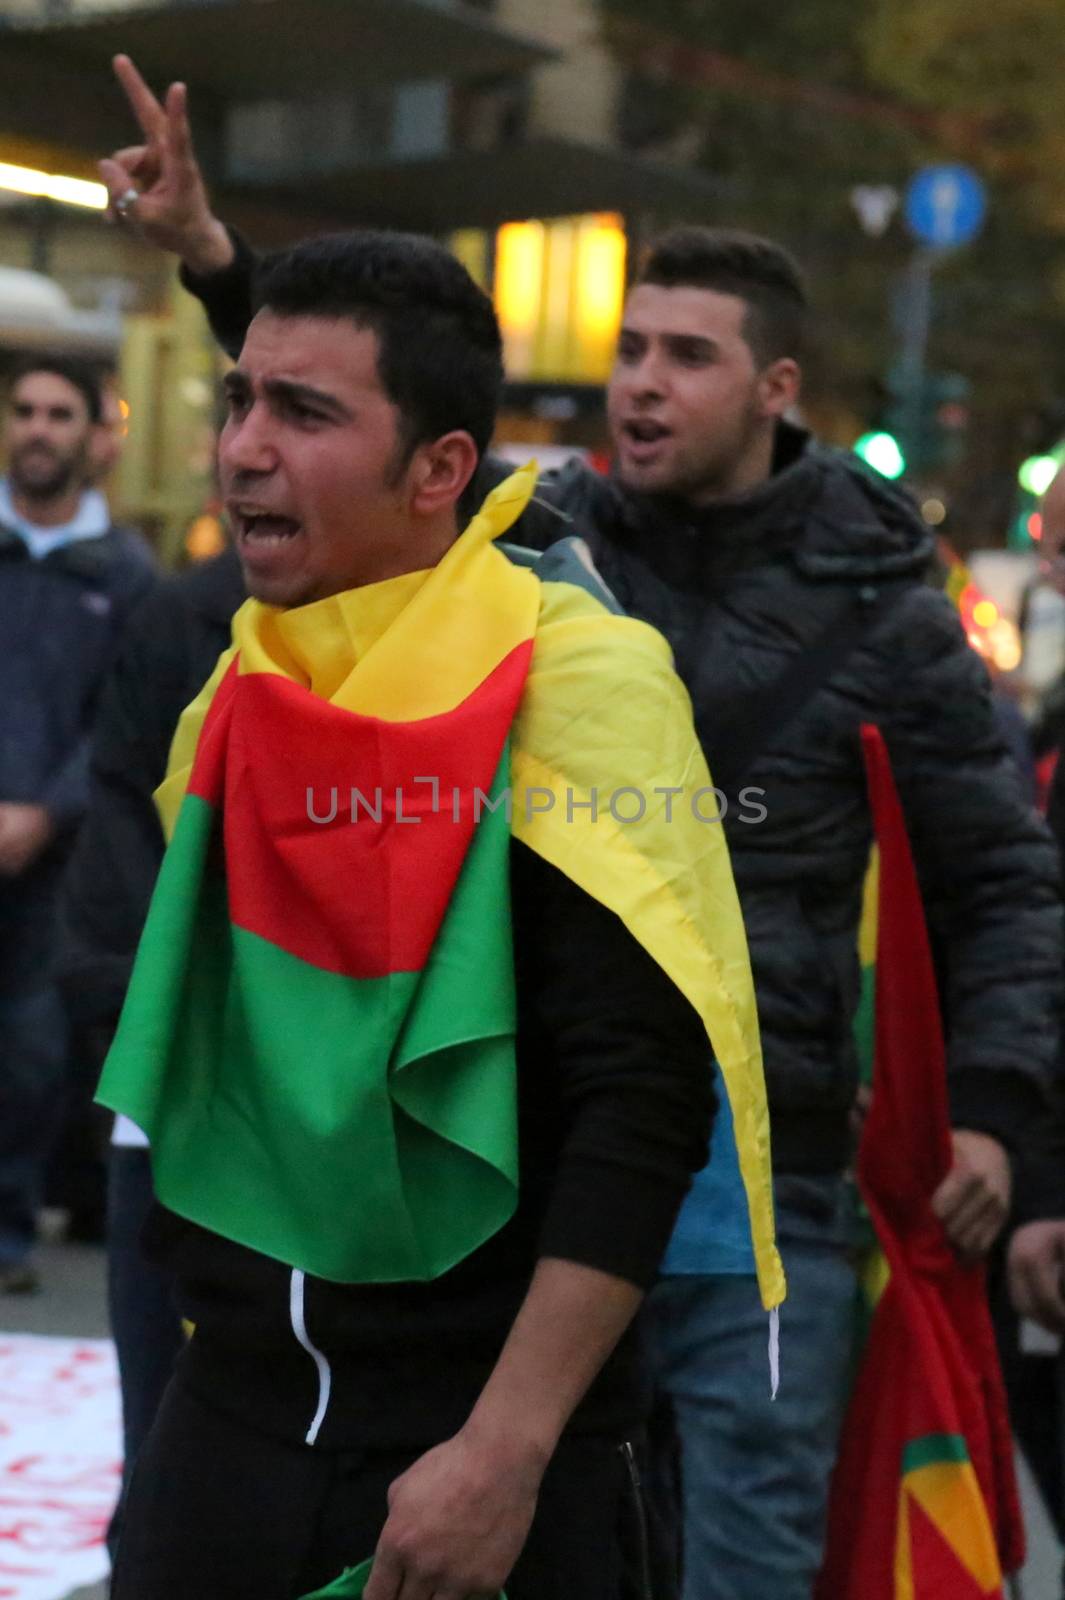 ITALY, Turin: A man screams as thousands rally at the Piazza Carlo Felice in Turin, Italy on October 13, 2015 to show solidarity with the people of Turkey, after the weekend's bombings in Ankara that left at least 97 dead. Demonstrators protest against the Turkish government, blaming the administration for the attack. Some Kurdish and leftist activists have asserted that these bombings were perpetrated in part by Turkey's governing AKP administration, intended as a blow to the pro-Kurdish HDP opposition ahead of the snap parliamentary elections in November. 